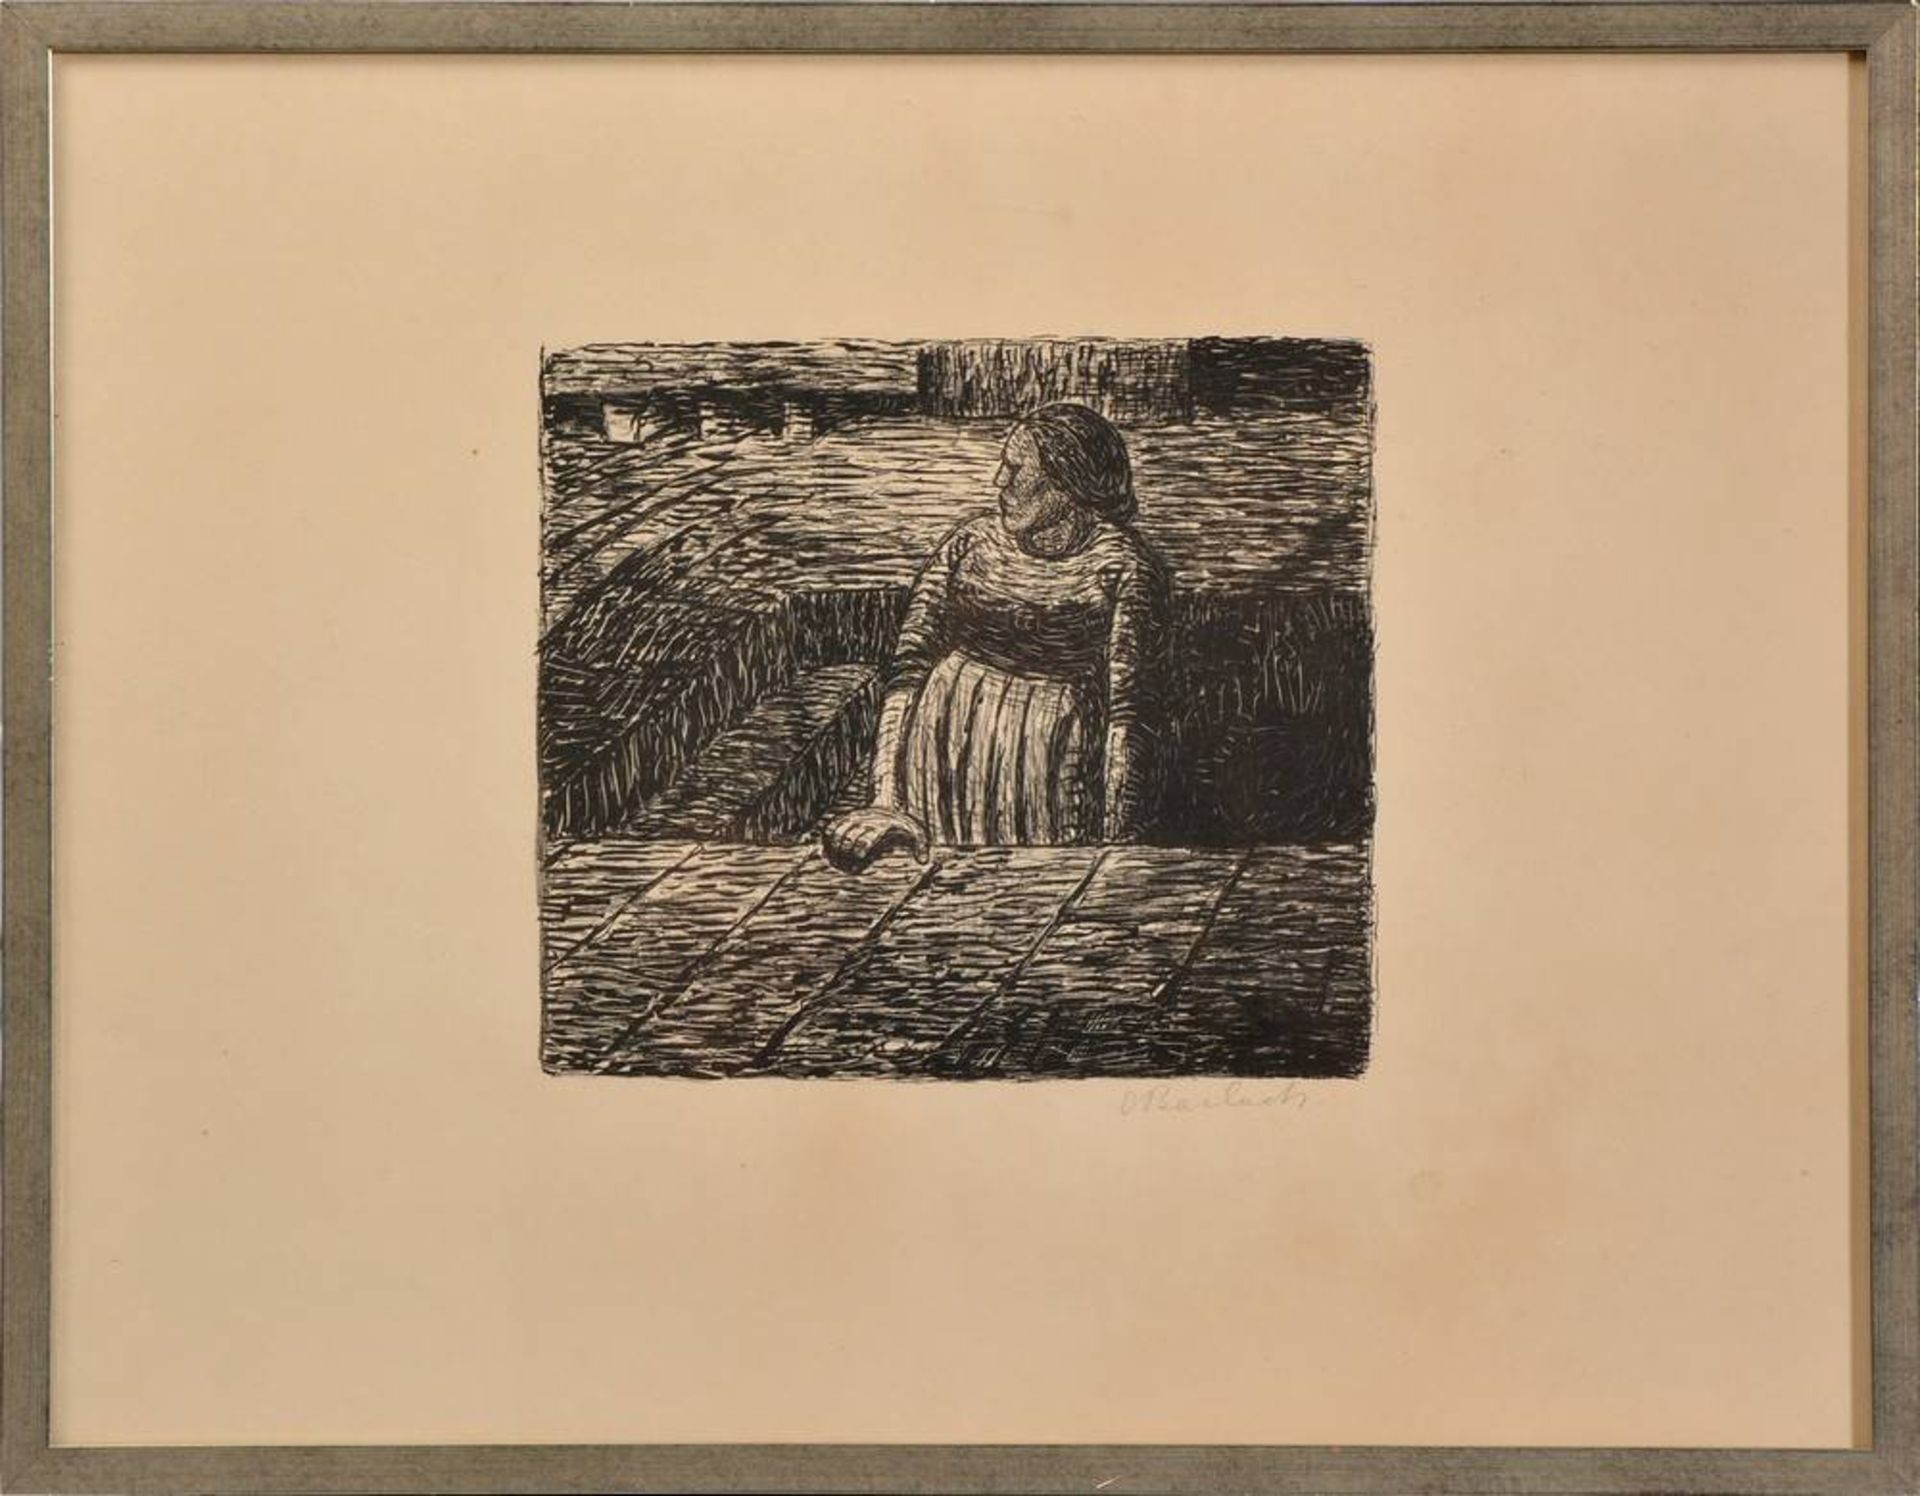 Ernst Barlach(1870, Wedel - 1938, Rostock), woman, standing on stairs, 1912, lithograph, signed